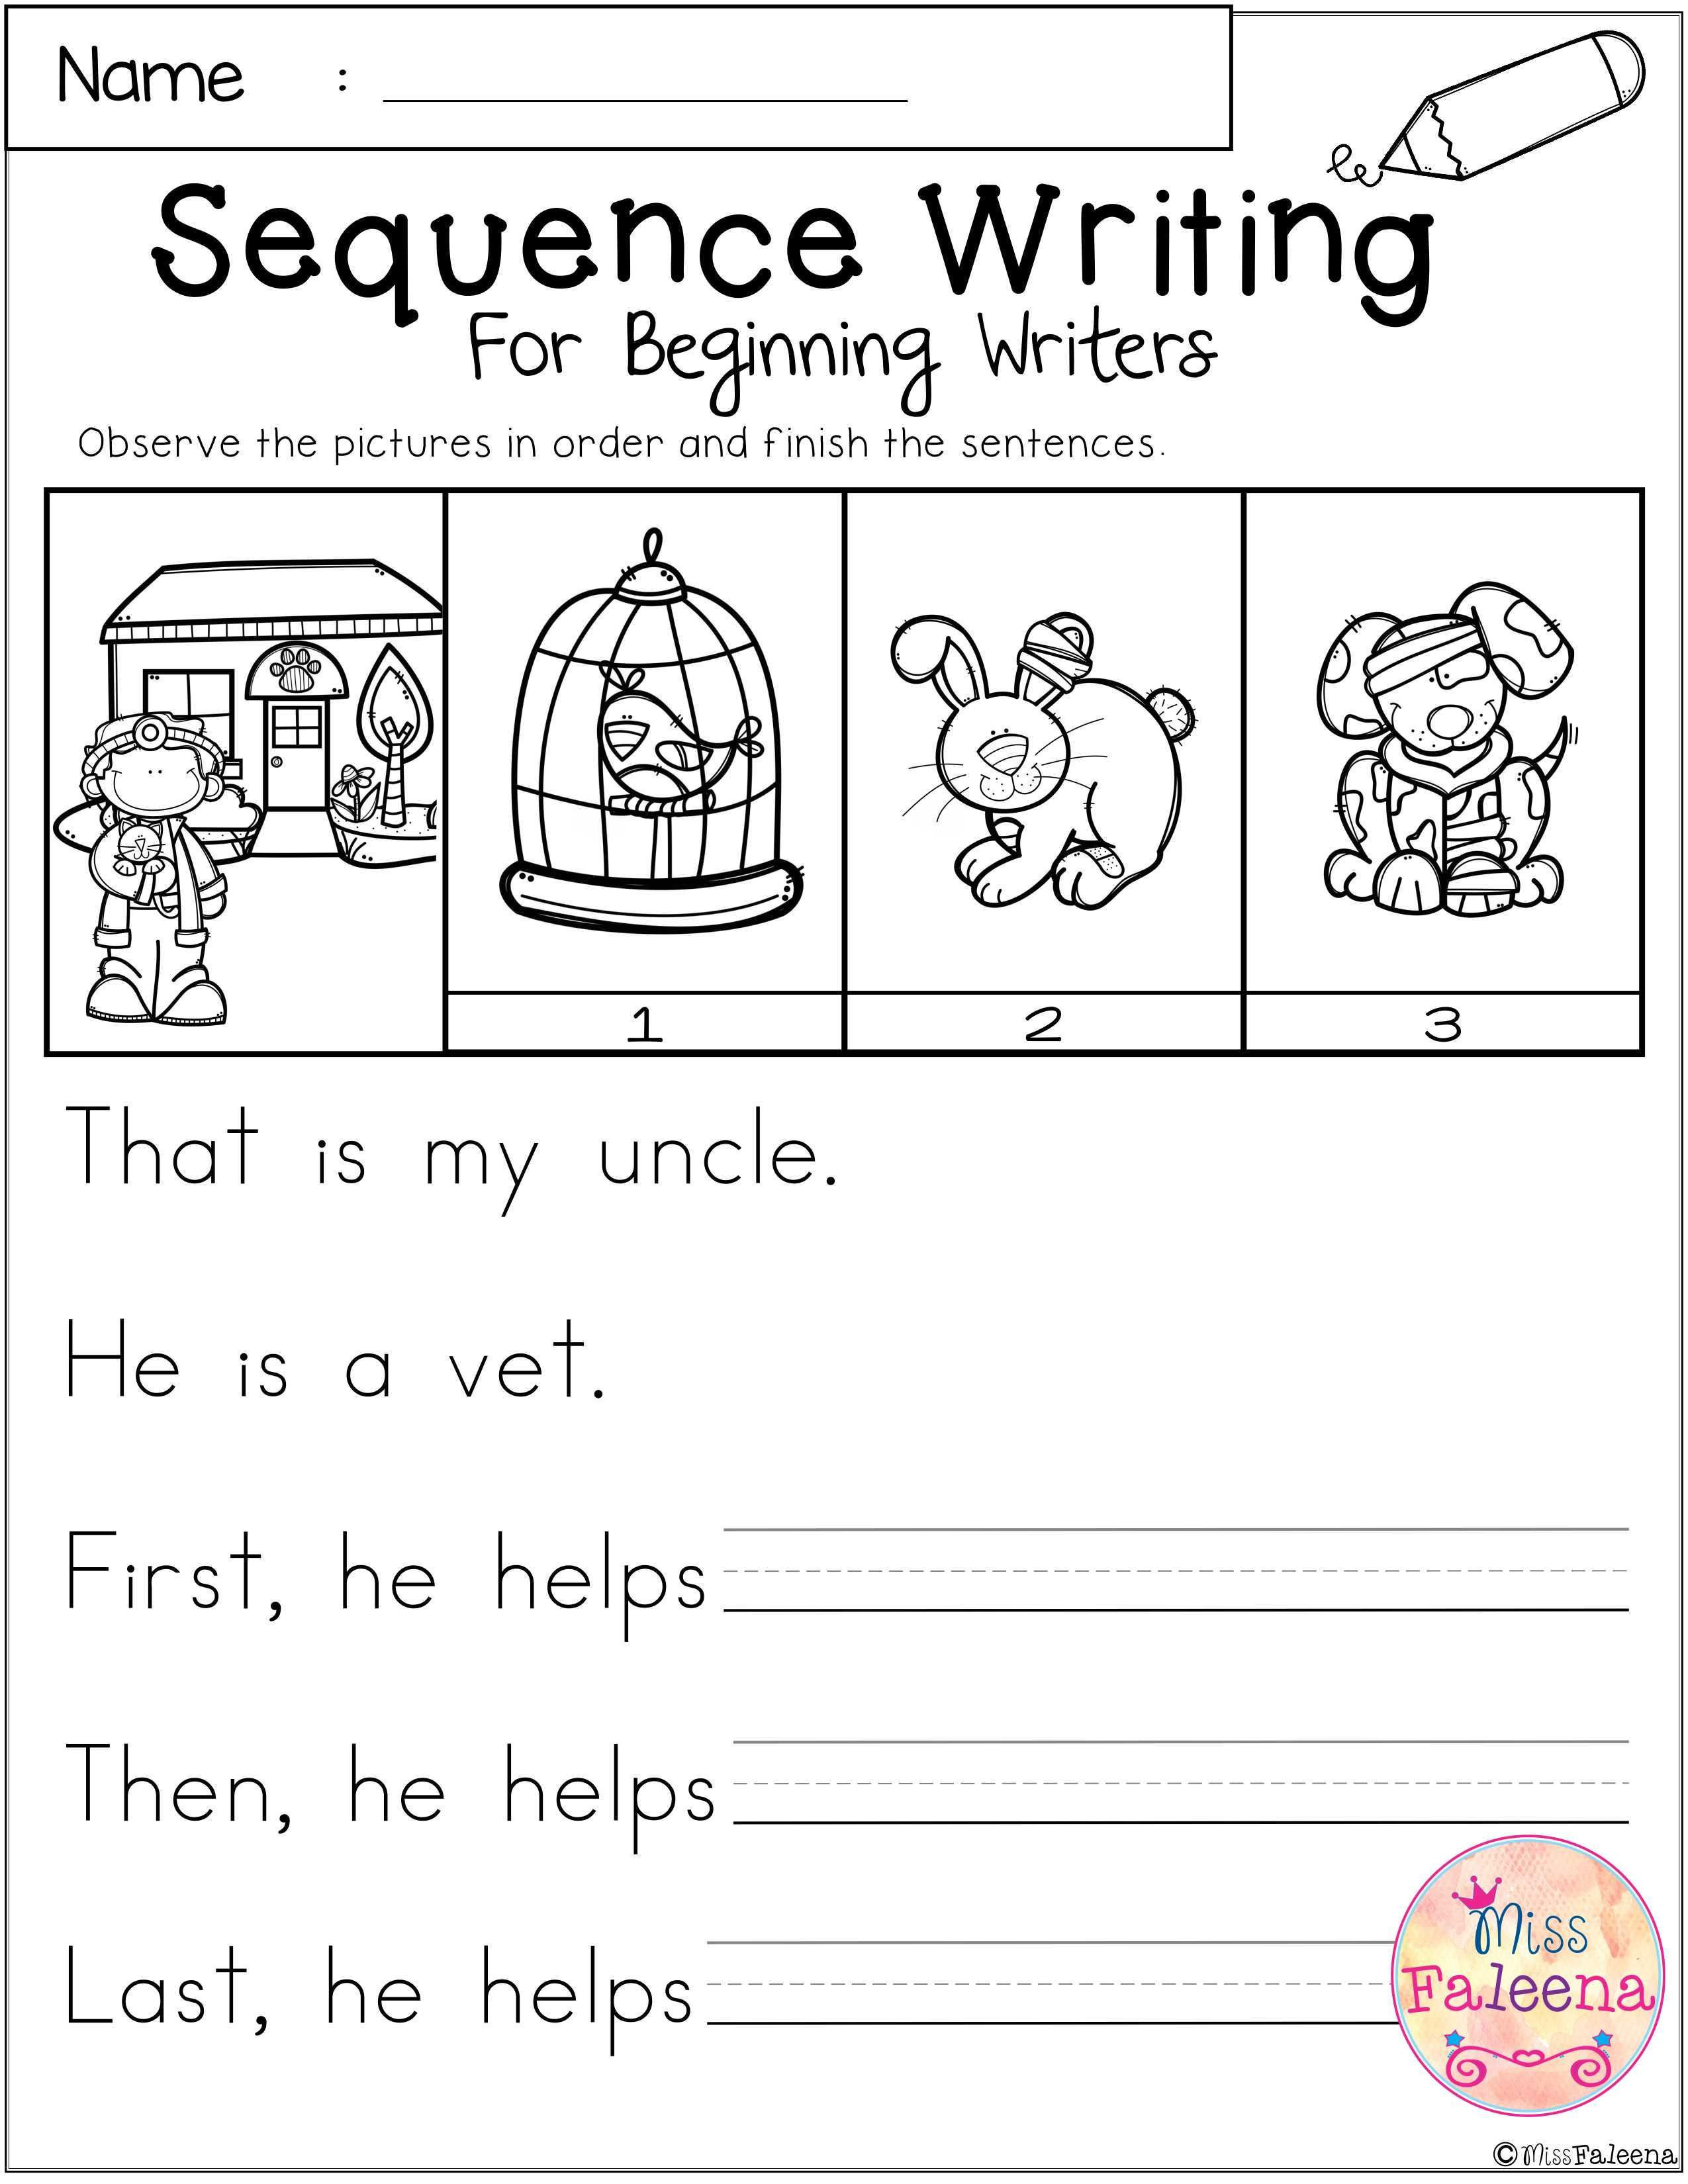 Kindergarten Sequencing Worksheet Free Sequence Writing for Beginning Writers